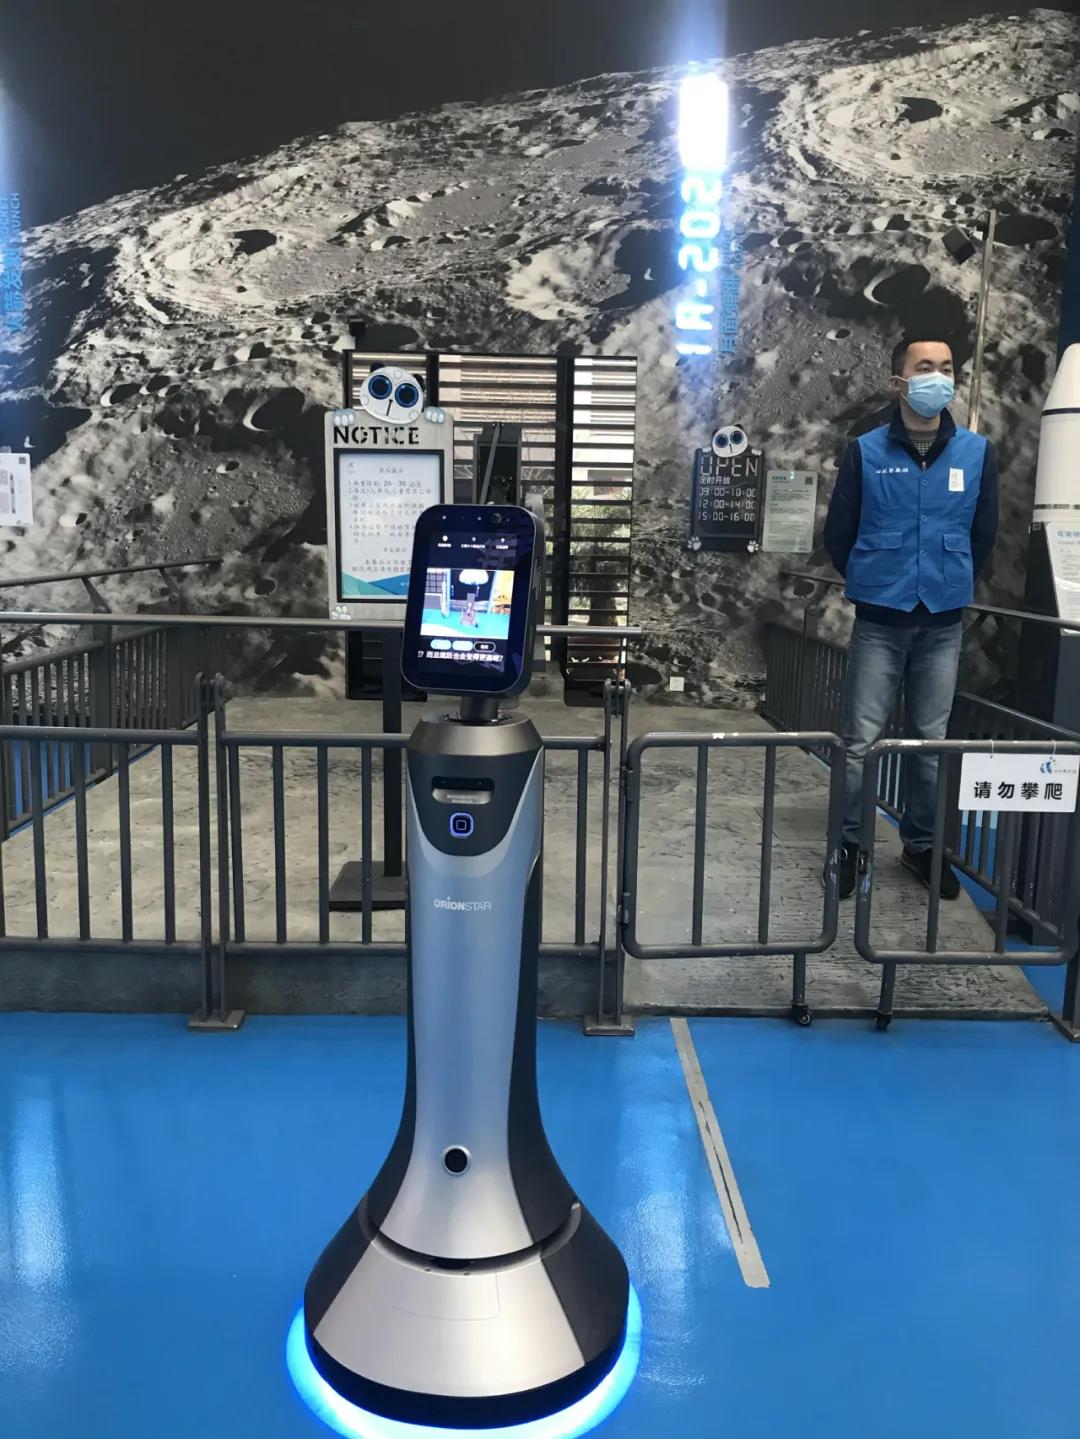 Sichuan Science and Technology Museum introduces OrionStar Robot (3)